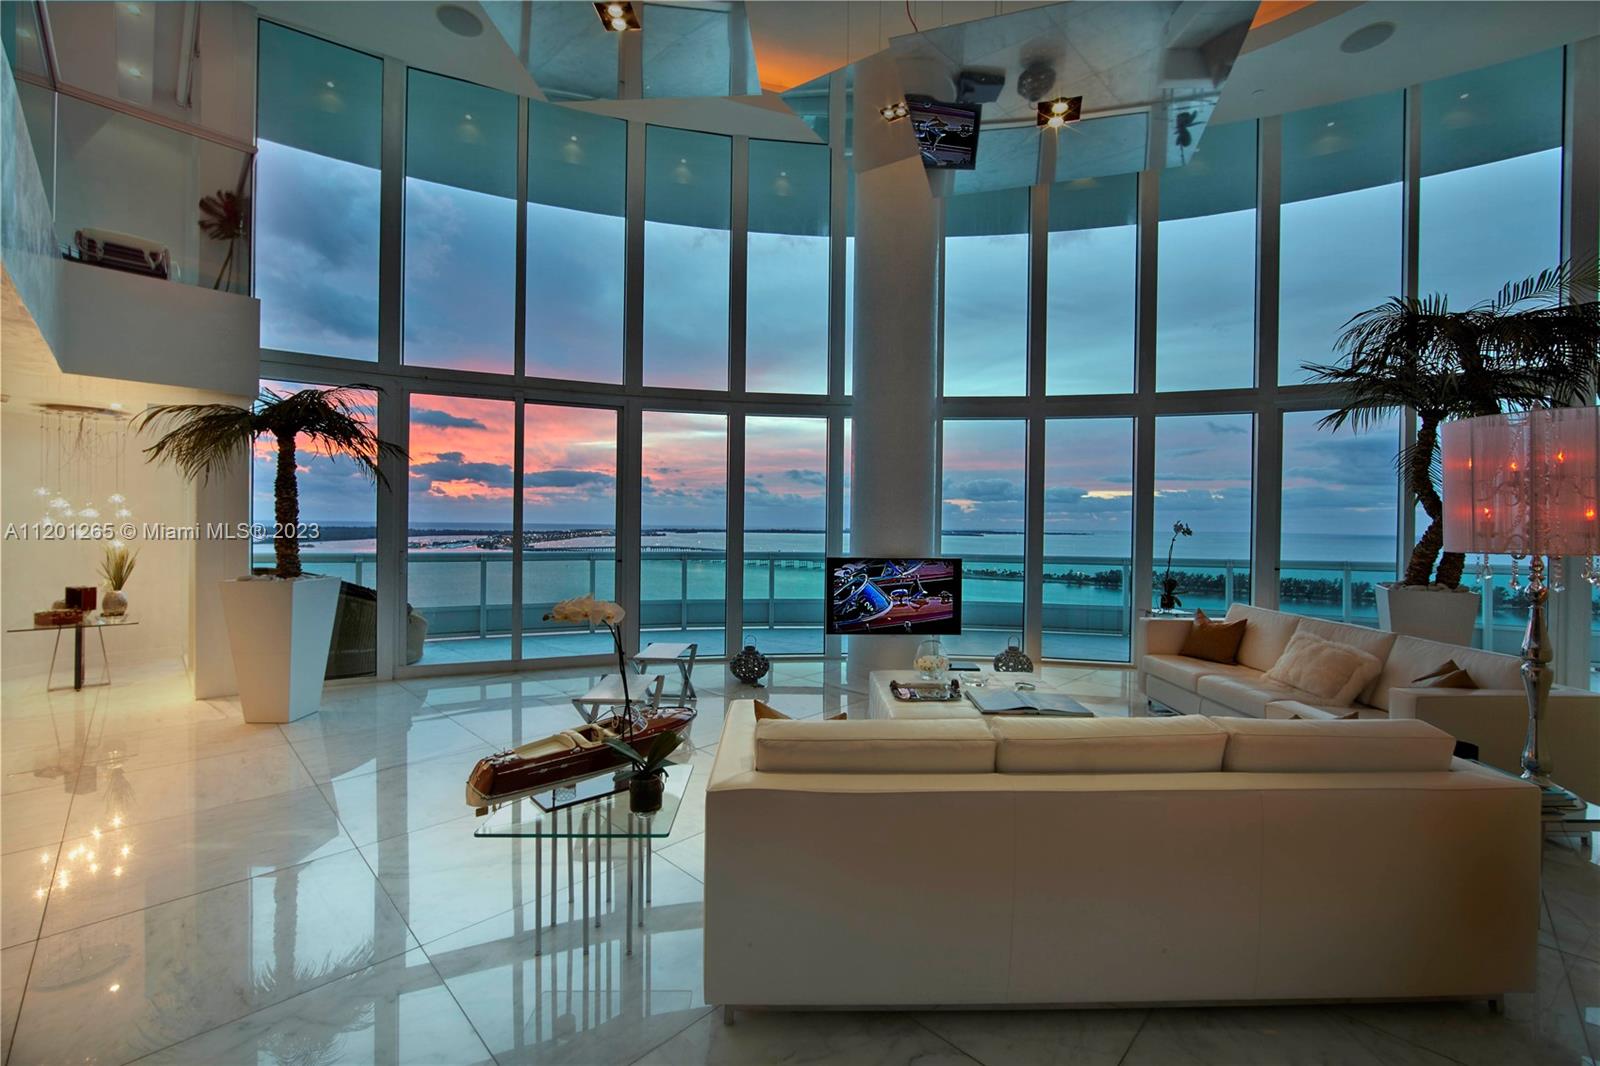 The iconic Santa Maria on Brickell. Residence 2902 offers mesmerizing views of the bay and the skyline from the moment the private elevator opens into the double height, all glass living room. Custom kitchen, formal dining room, 2 guest bedrooms en-suite and powder room. Off the kitchen, the service staircase takes you to the housekeeper's quarter. From the living room the elegant wood staircase takes you to the gorgeous and very spacious master wing, with a large walk-in closet, all white marble master bathroom, office space and its private terrace . Dock available separately either 60' for $500,000 or 90' for $1mil Please call for details